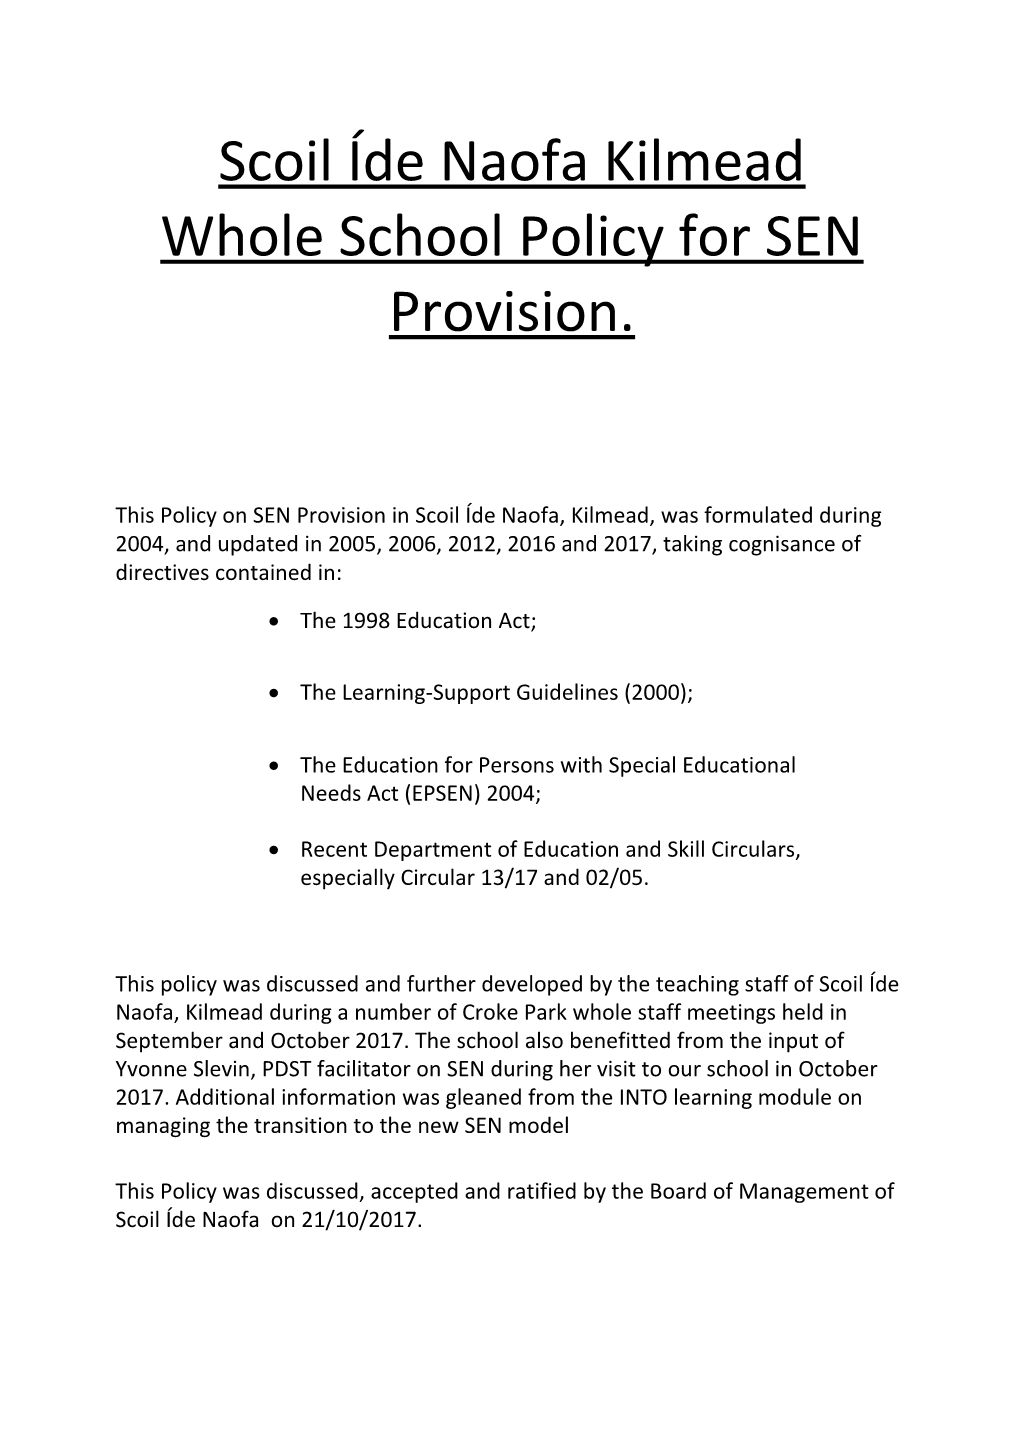 Whole School Policy for SEN Provision